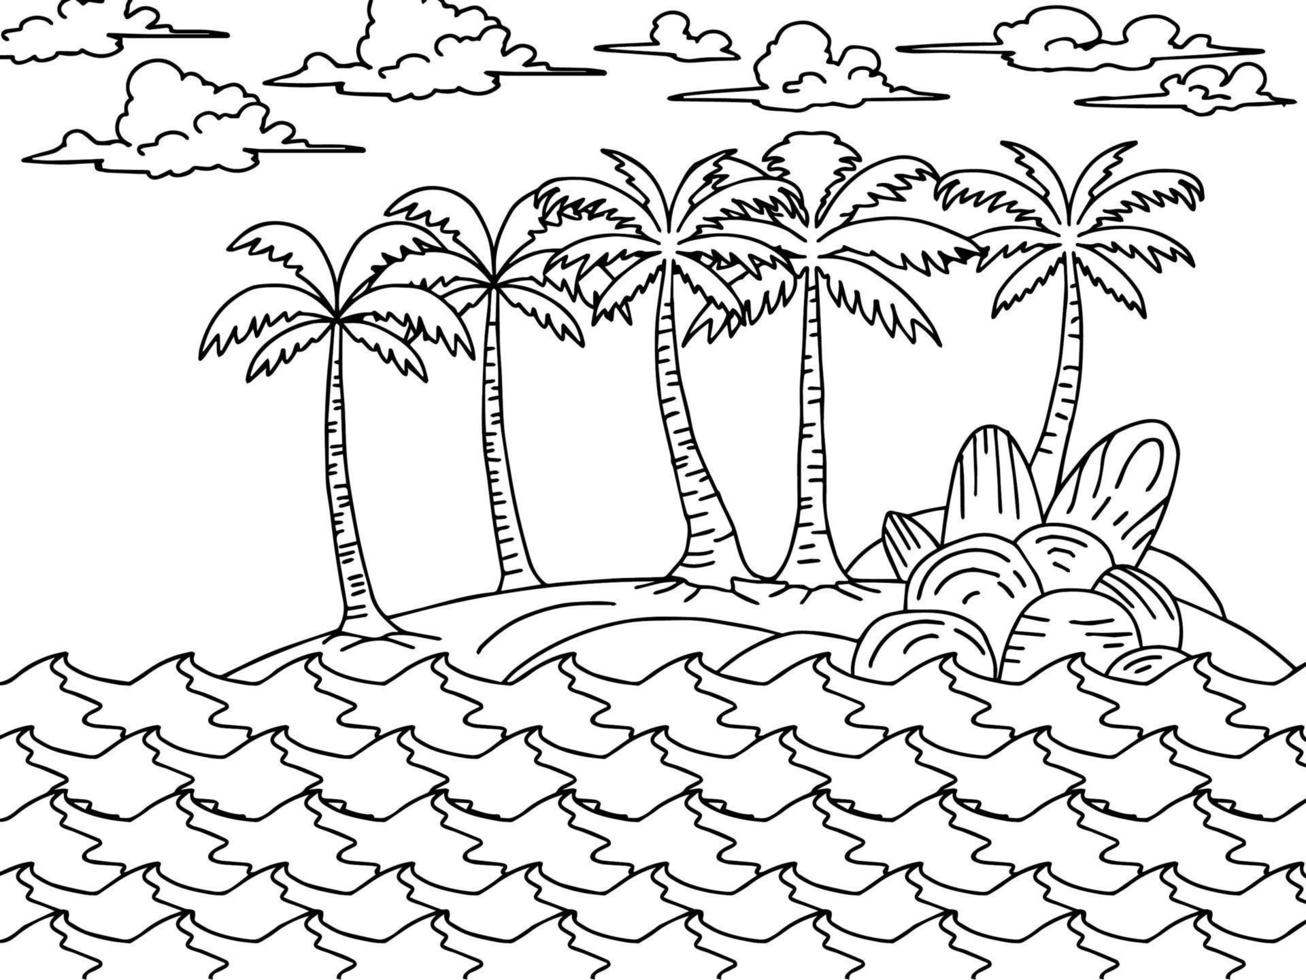 Print Design Beach Landscape Outline for Coloring Page or Element vector